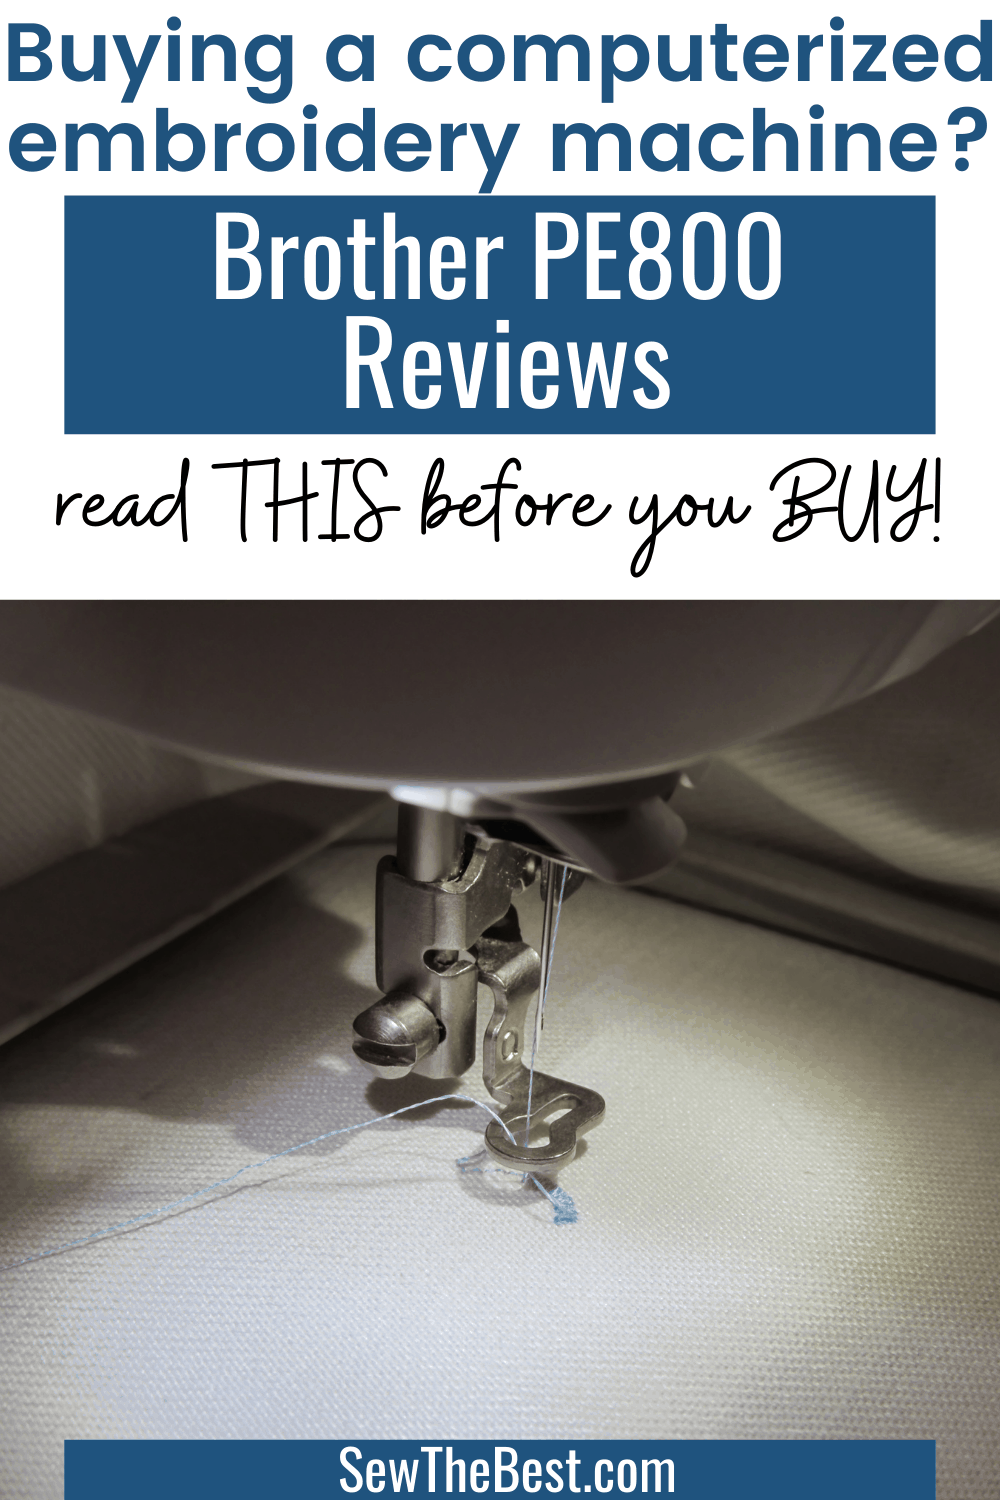 Brother PE800 review. Buying a computerized embroidery machine? Brother PE800 Reviews. Read THIS before you BUY. #AD #SewingMachine #Sewing #EmbroideryMachine